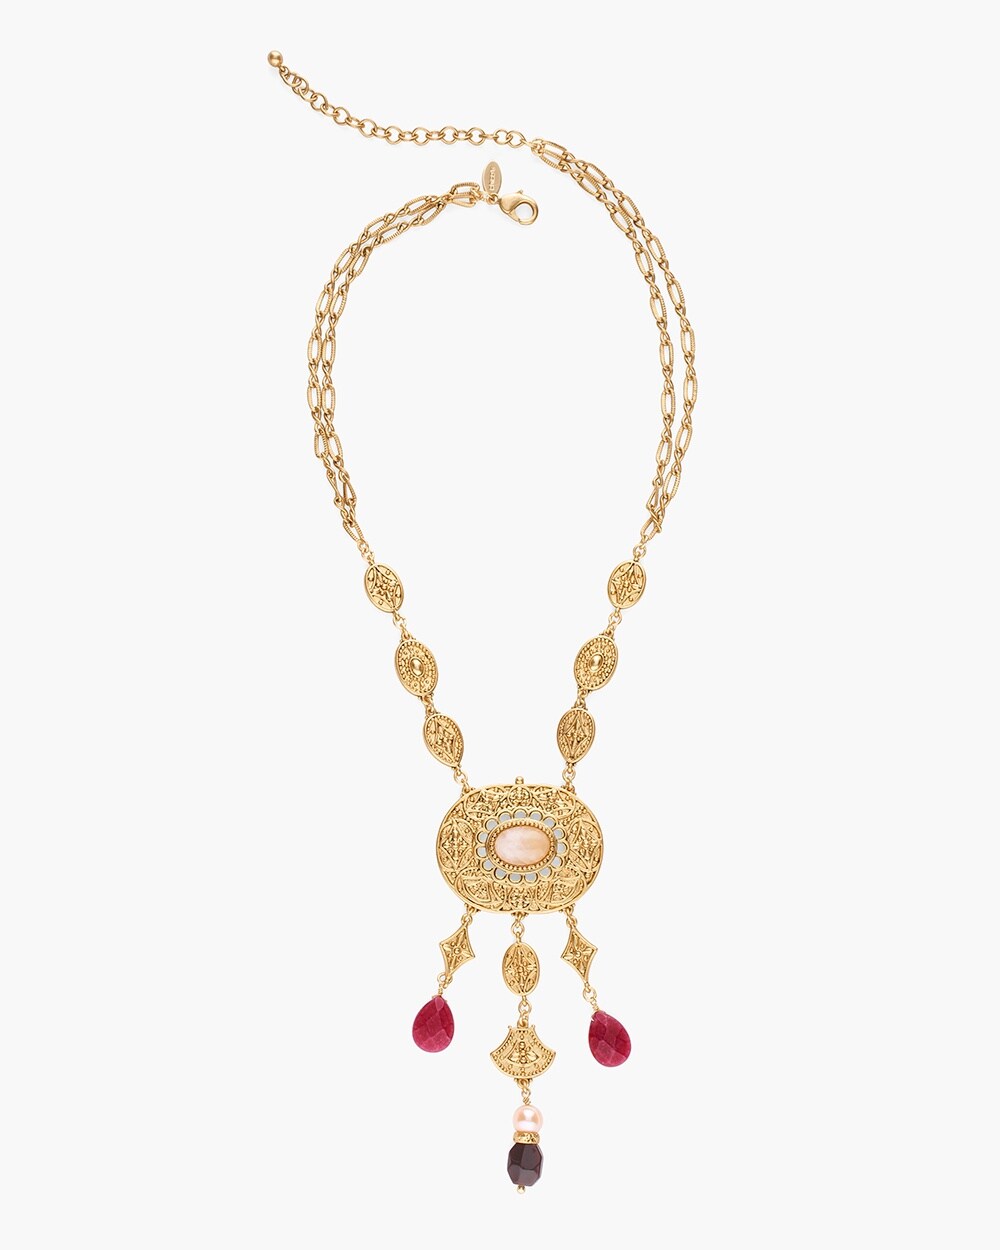 Pink and Merlot Statement Necklace